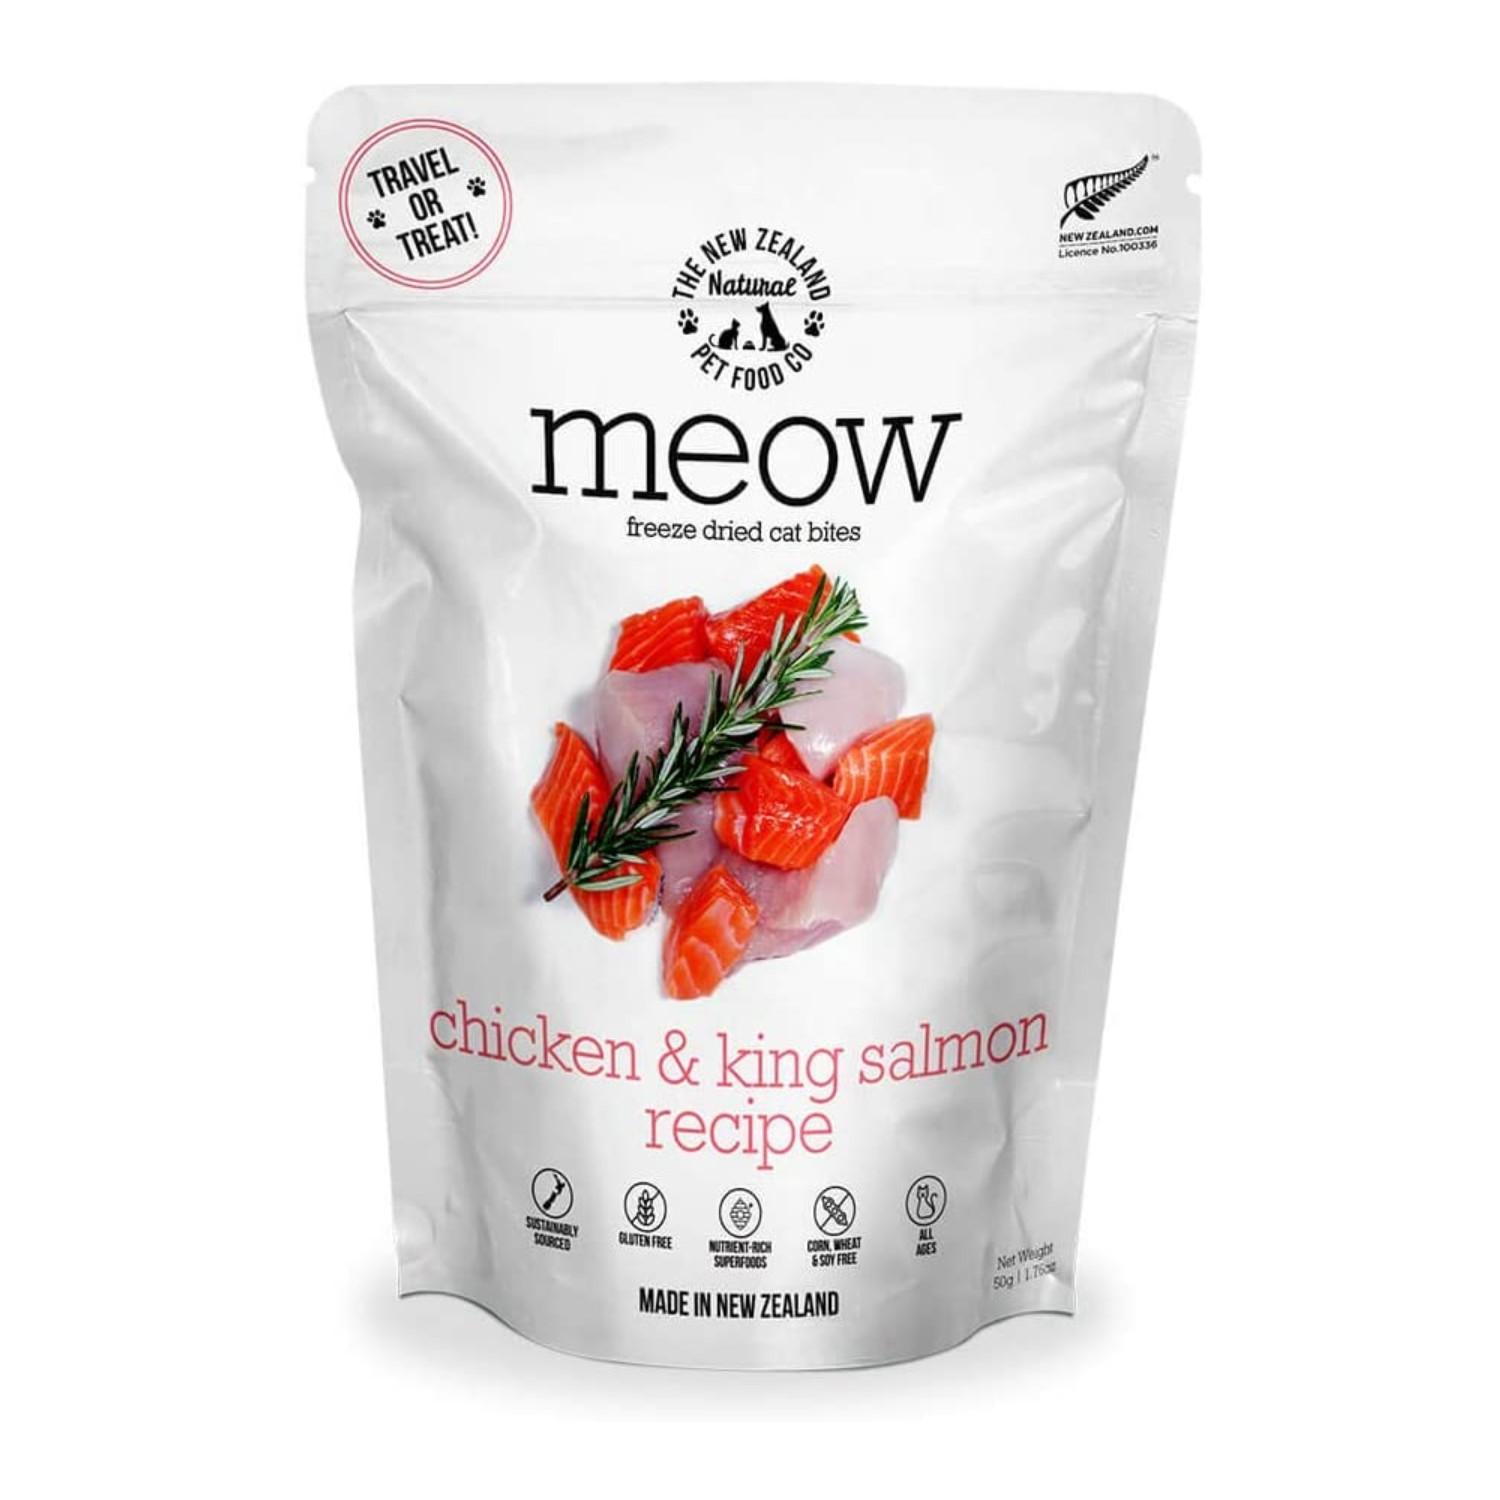 The New Zealand Natural Pet Food Co. Meow Freeze Dried Cat Food - Chicken & King Salmon